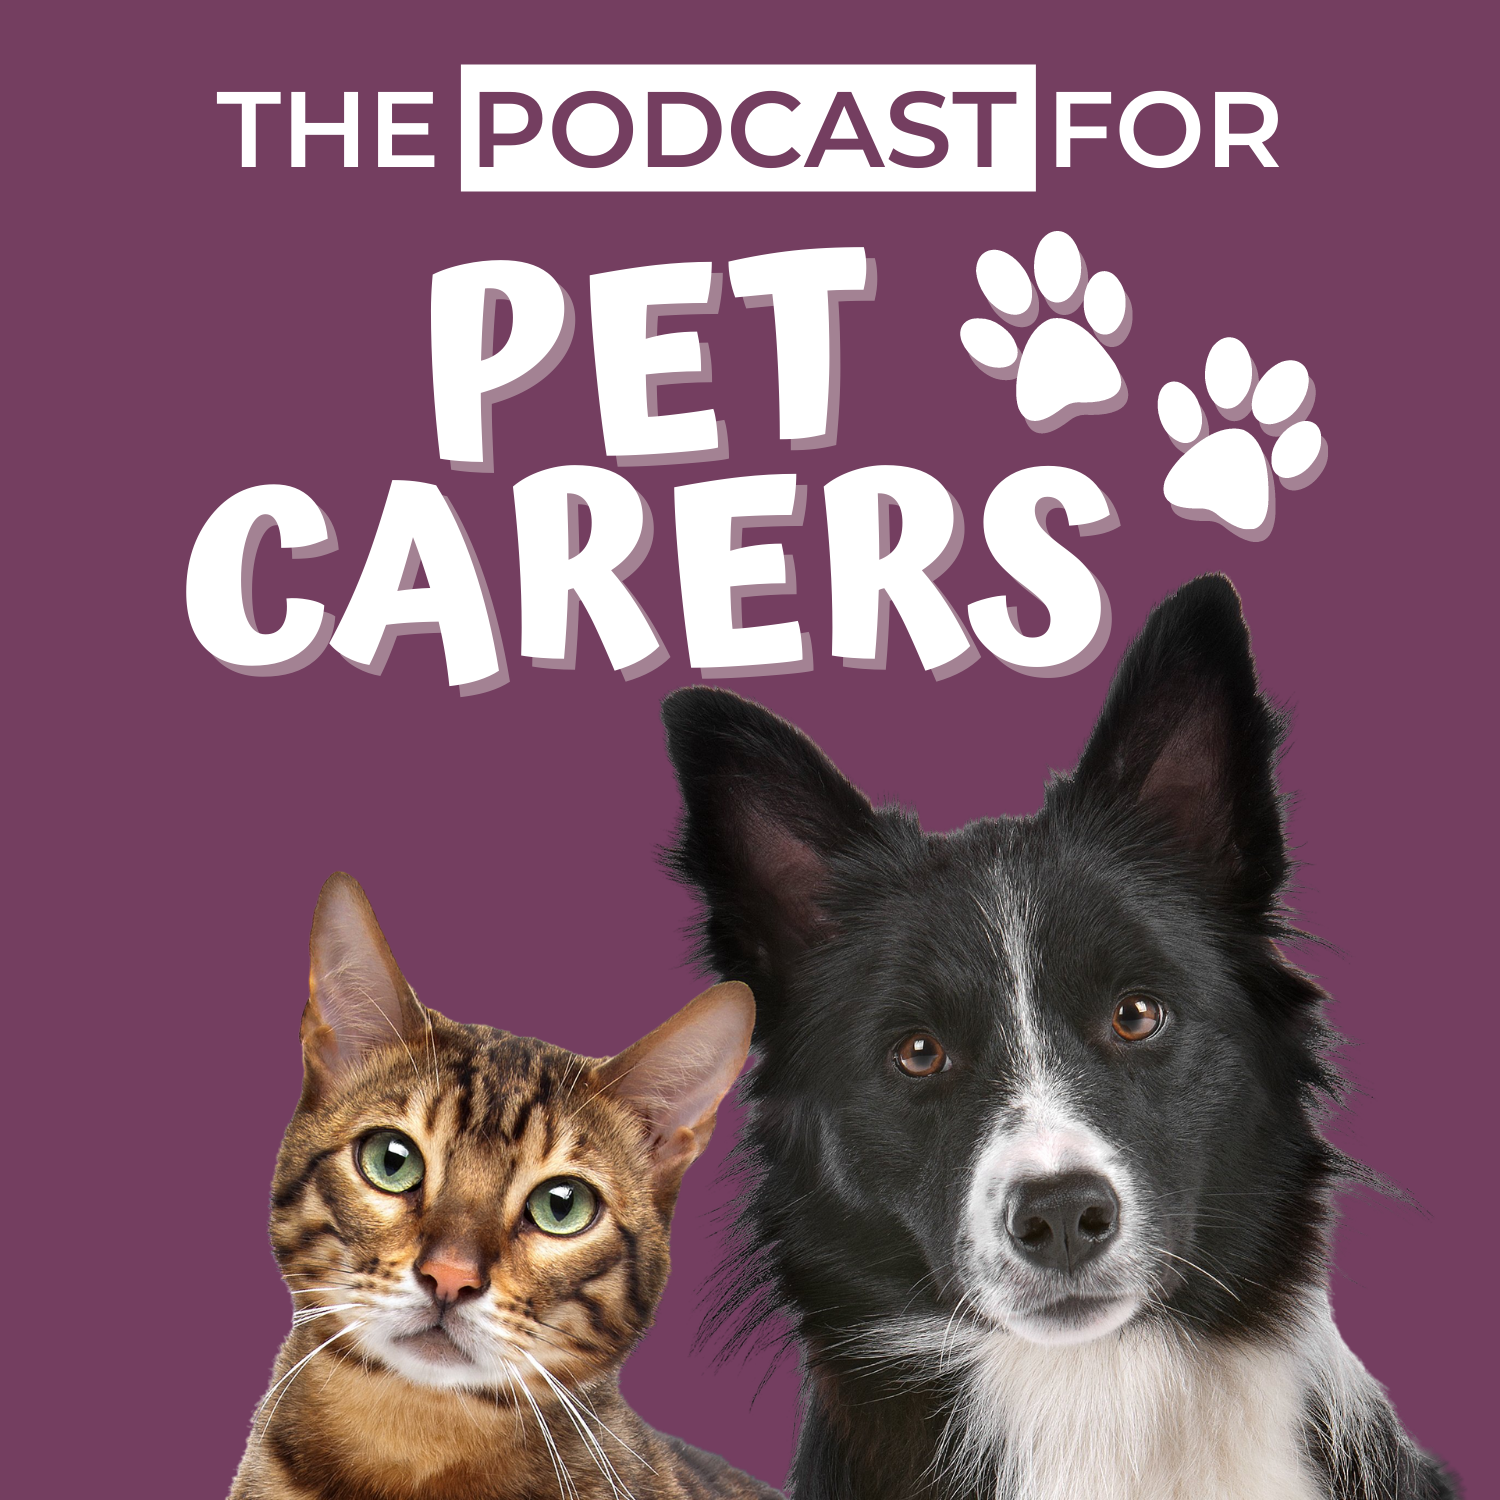 The Podcast for Pet Carers